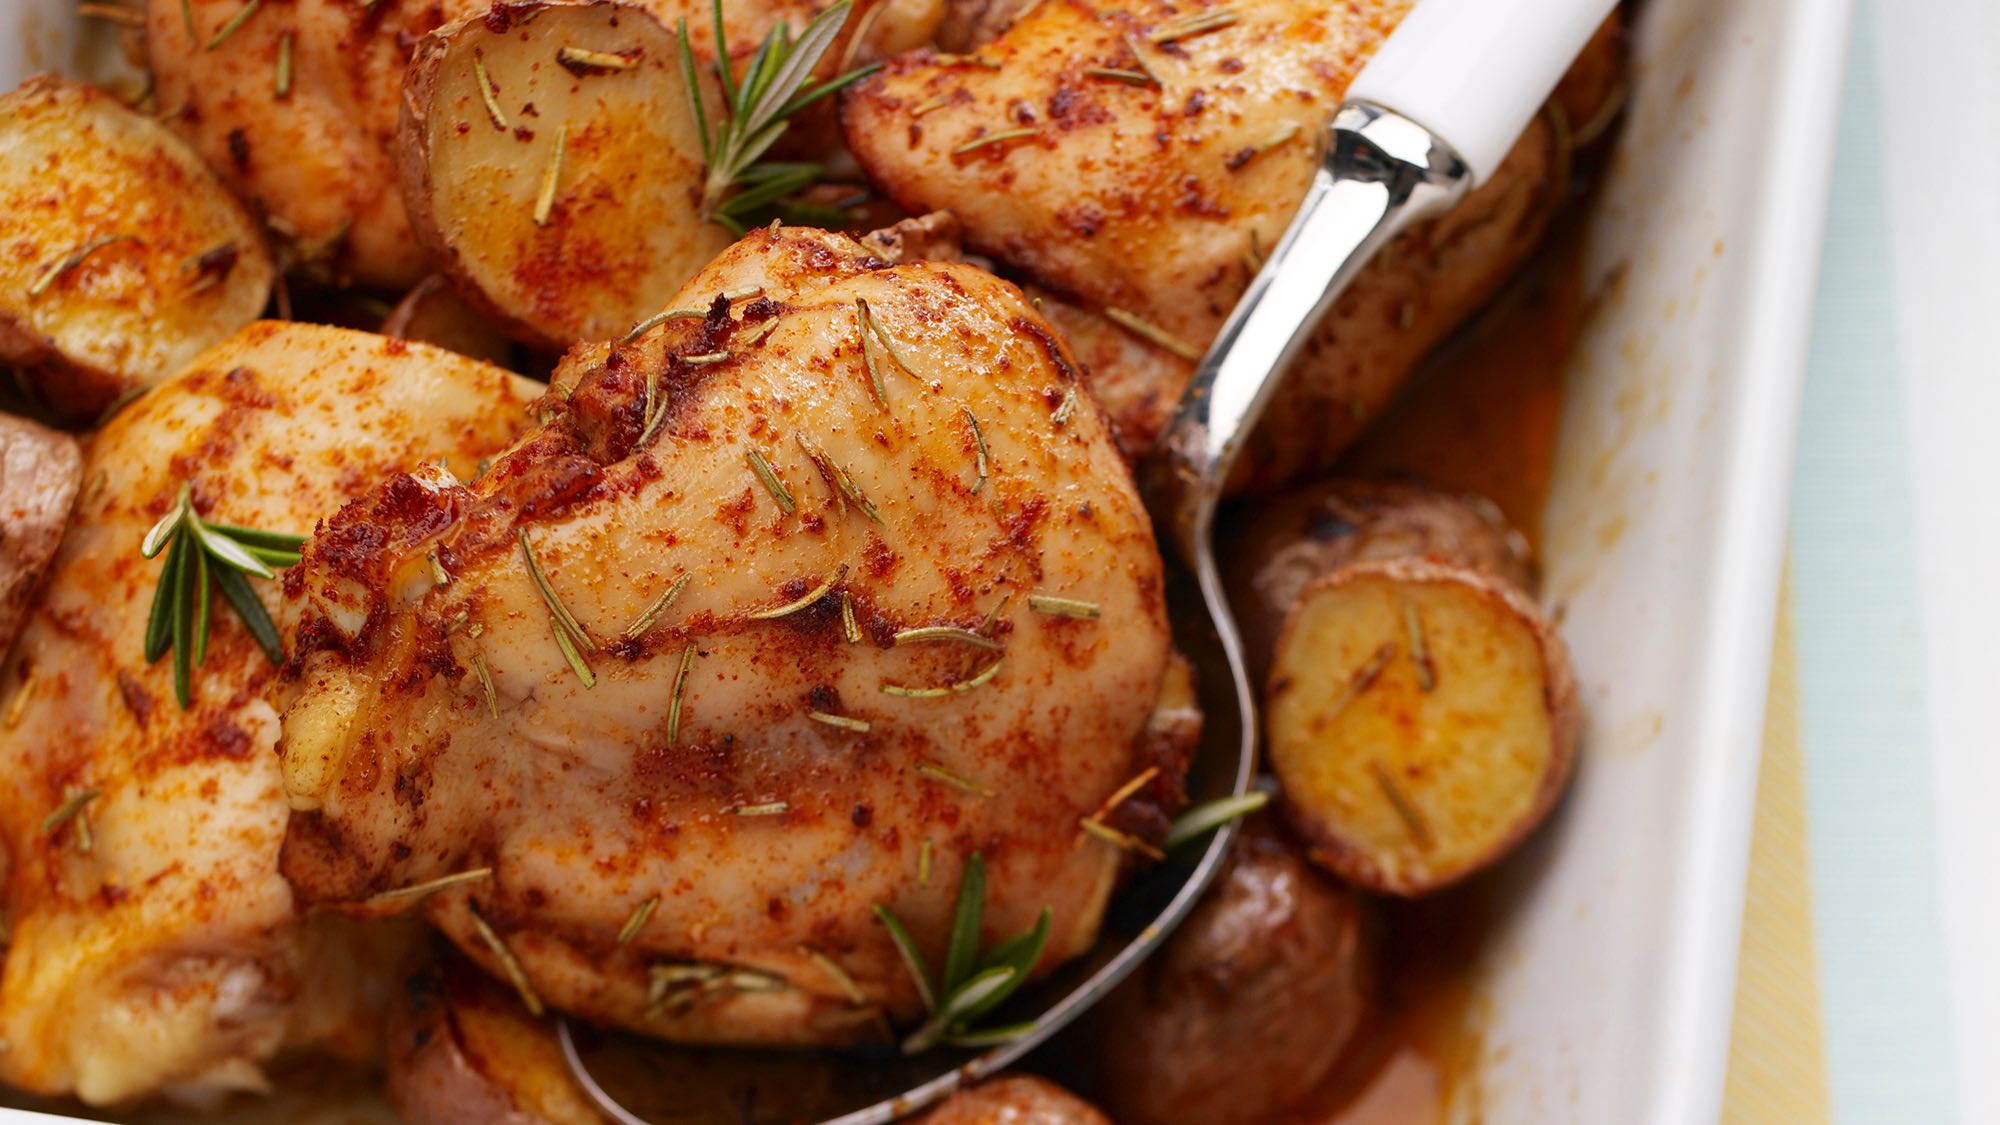 ROSEMARY BAKED CHICKEN WITH POTATOES